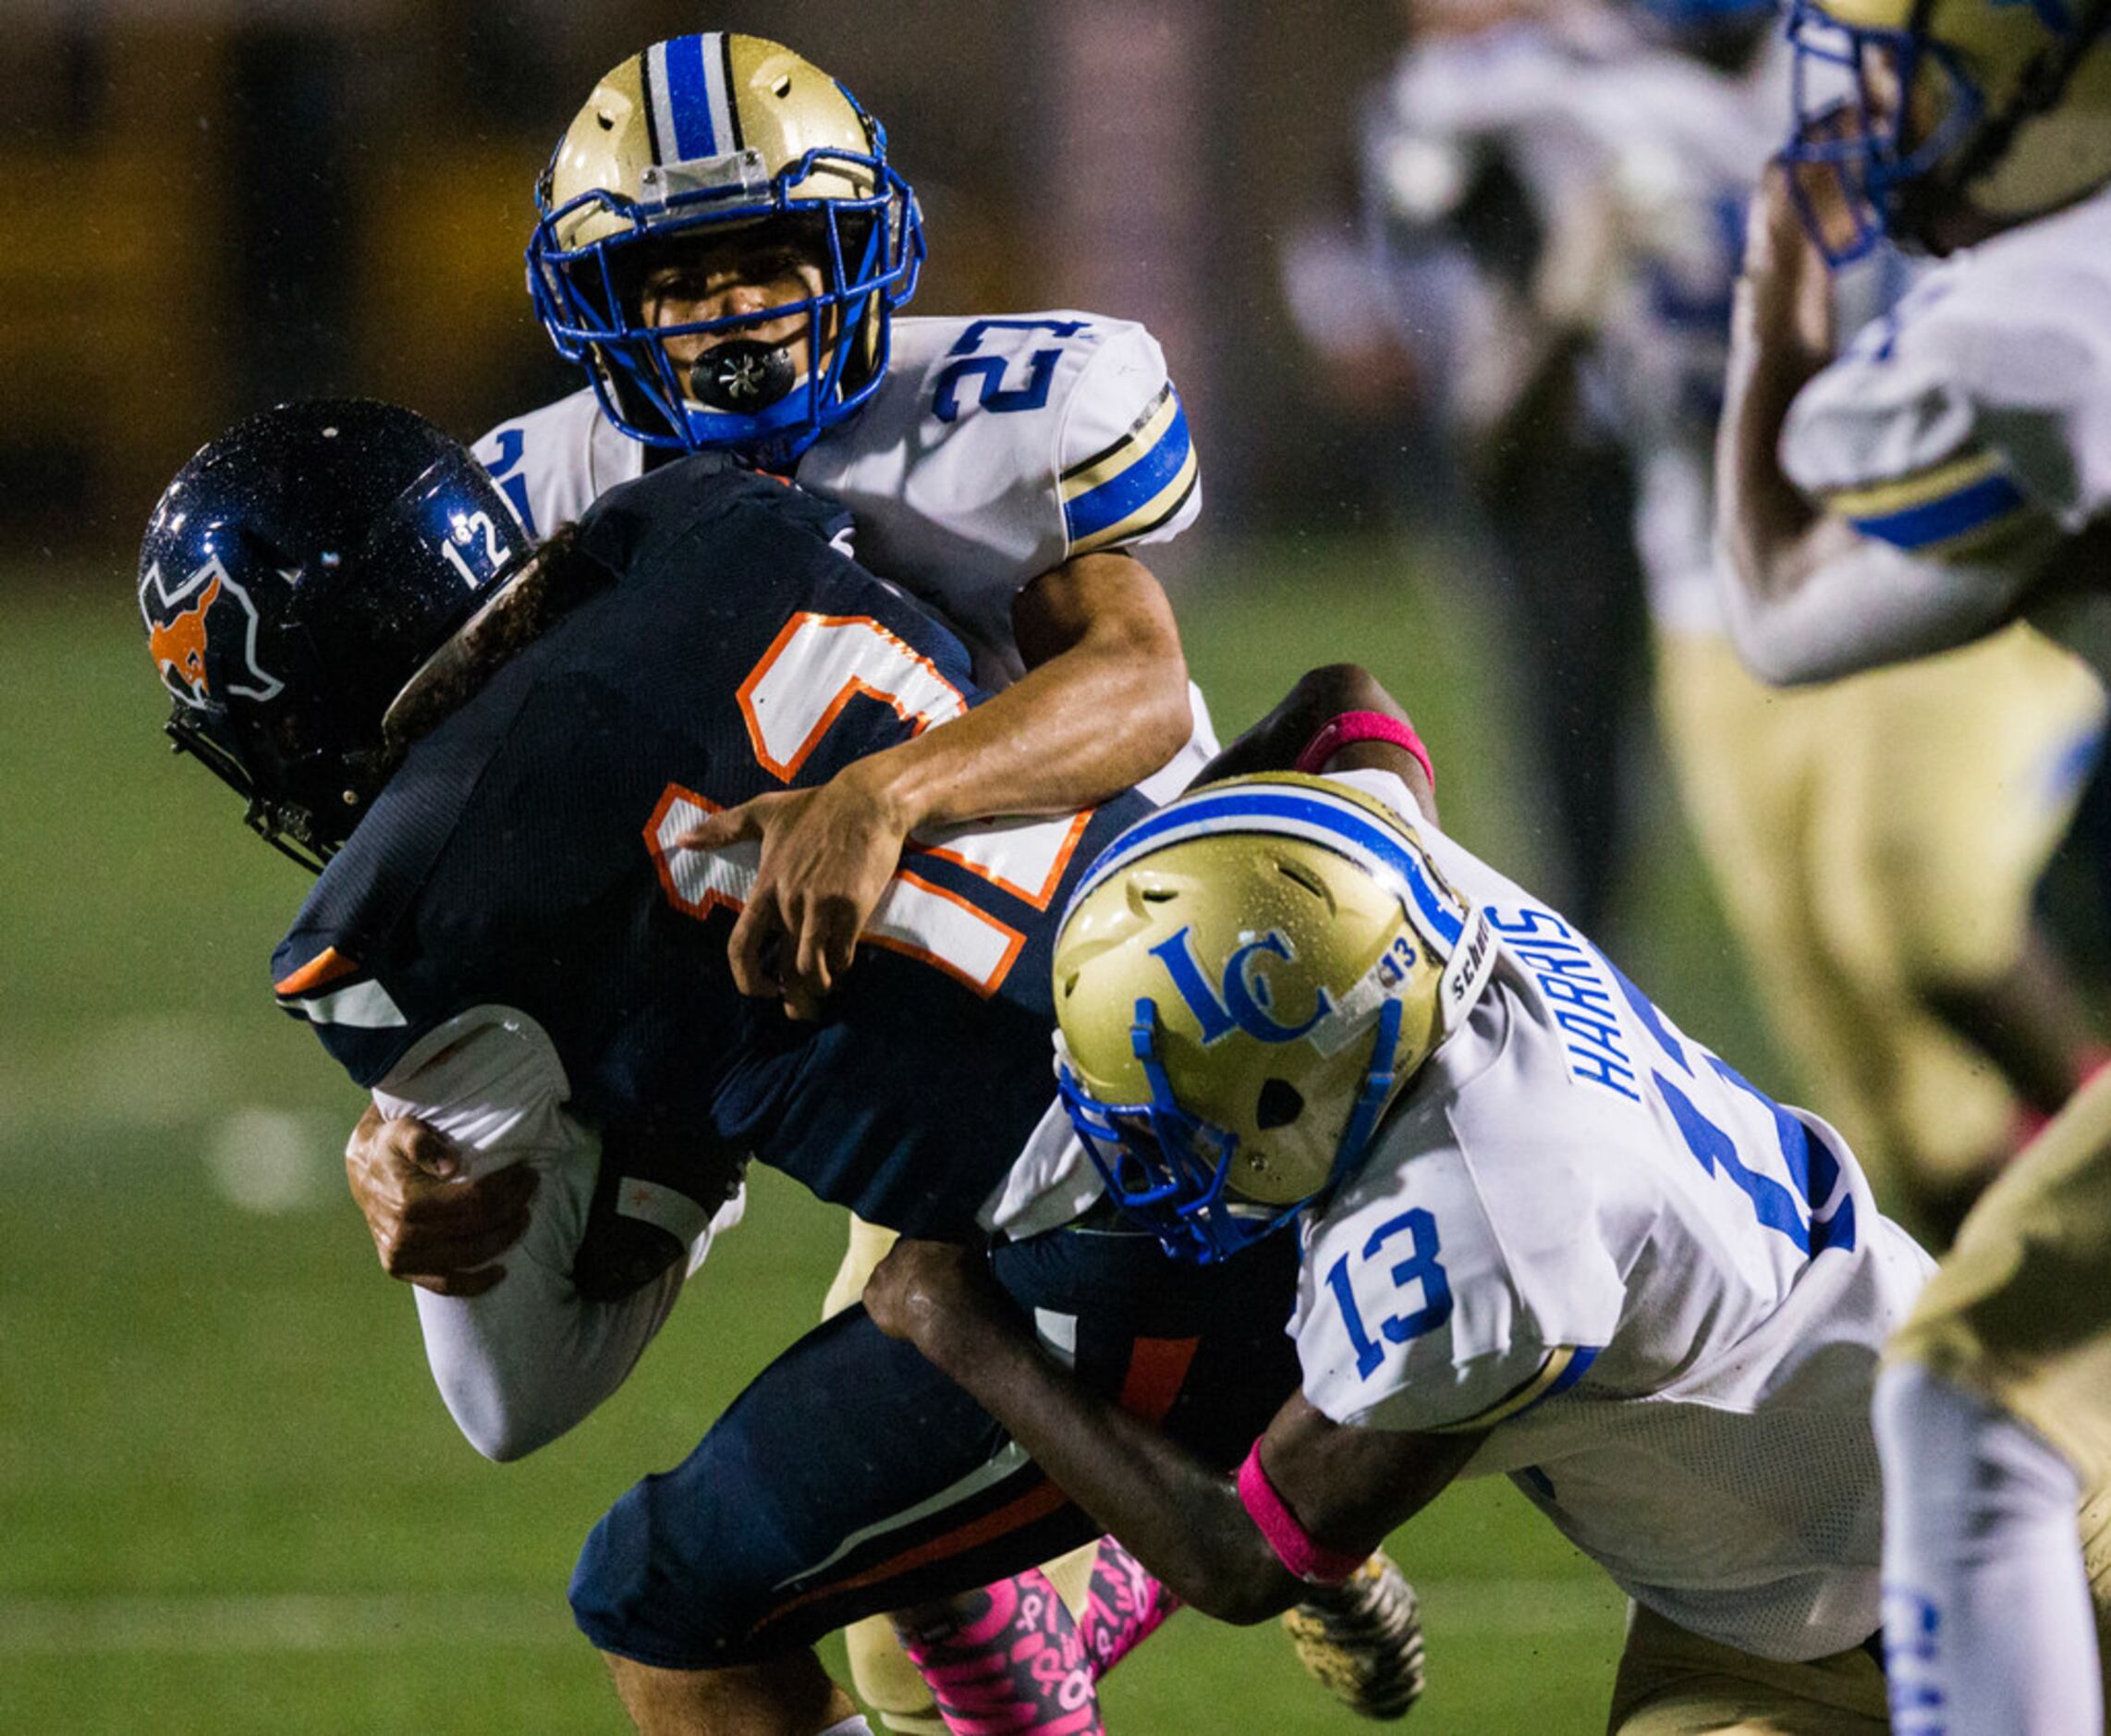 Sachse quarterback Xavier Forman (12) is tackled by Garland Lakeview linebacker Gavin Harris...